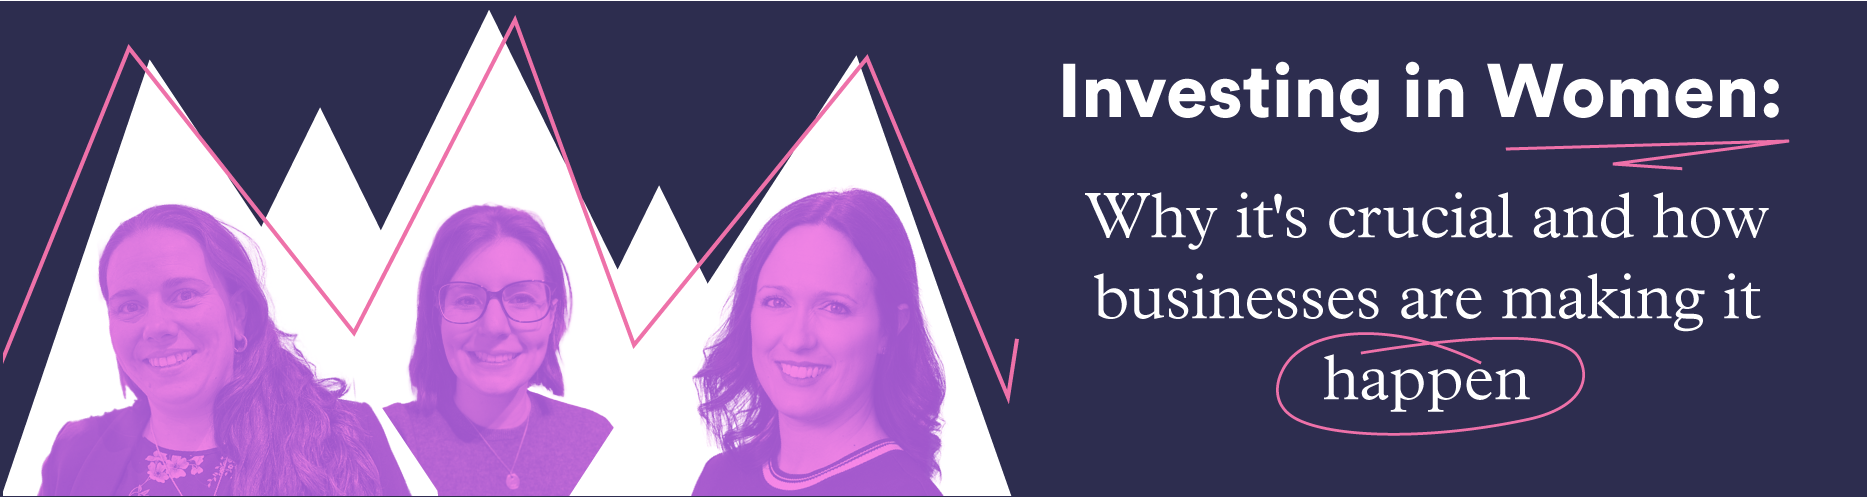 Investing in Women: Why It's Crucial & How Businesses Are Making It Happen